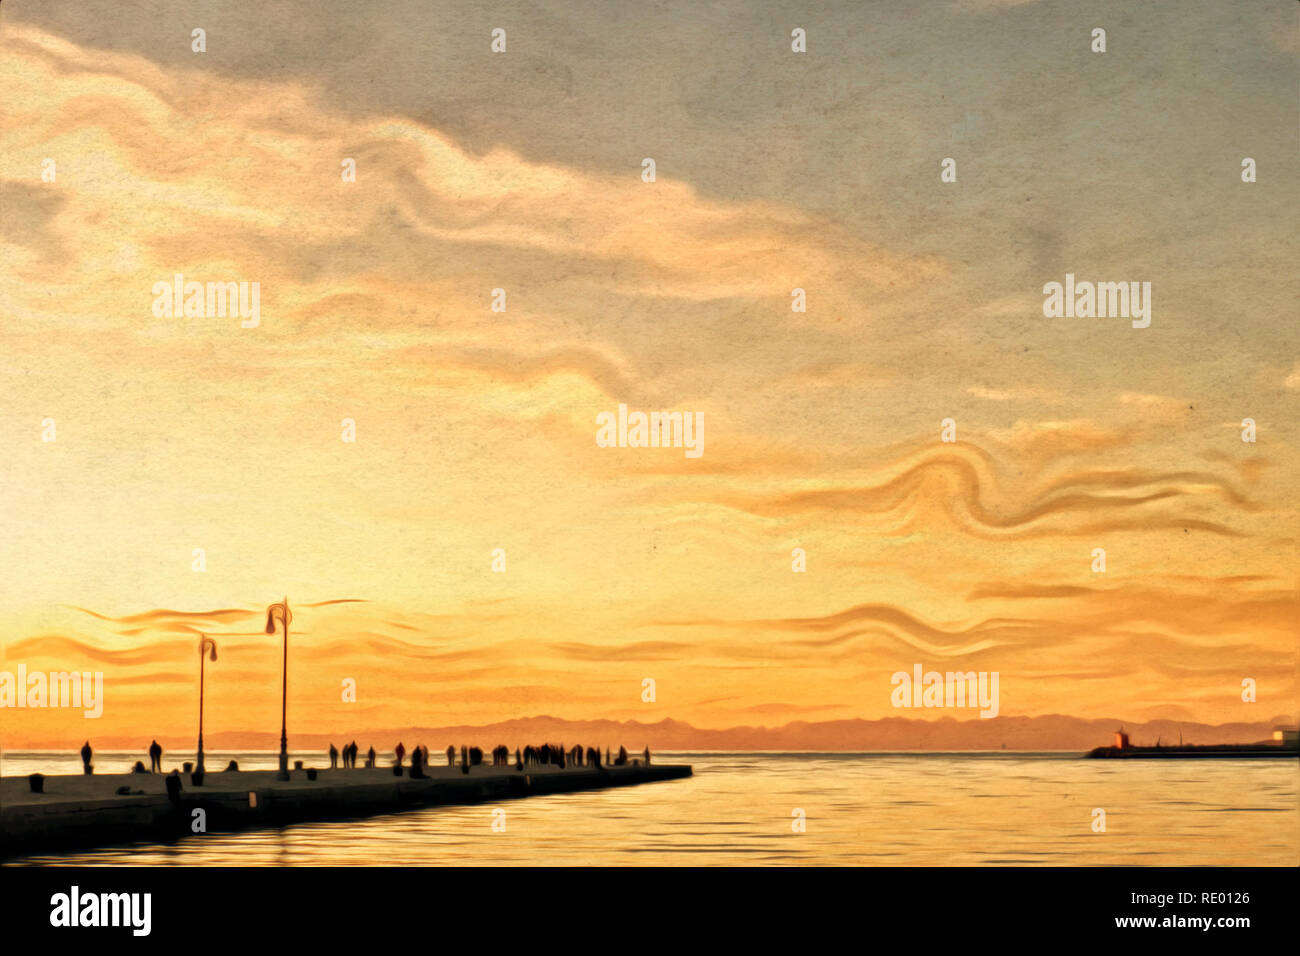 Trieste. The Molo Audace. Digital oil painting. Stock Photo